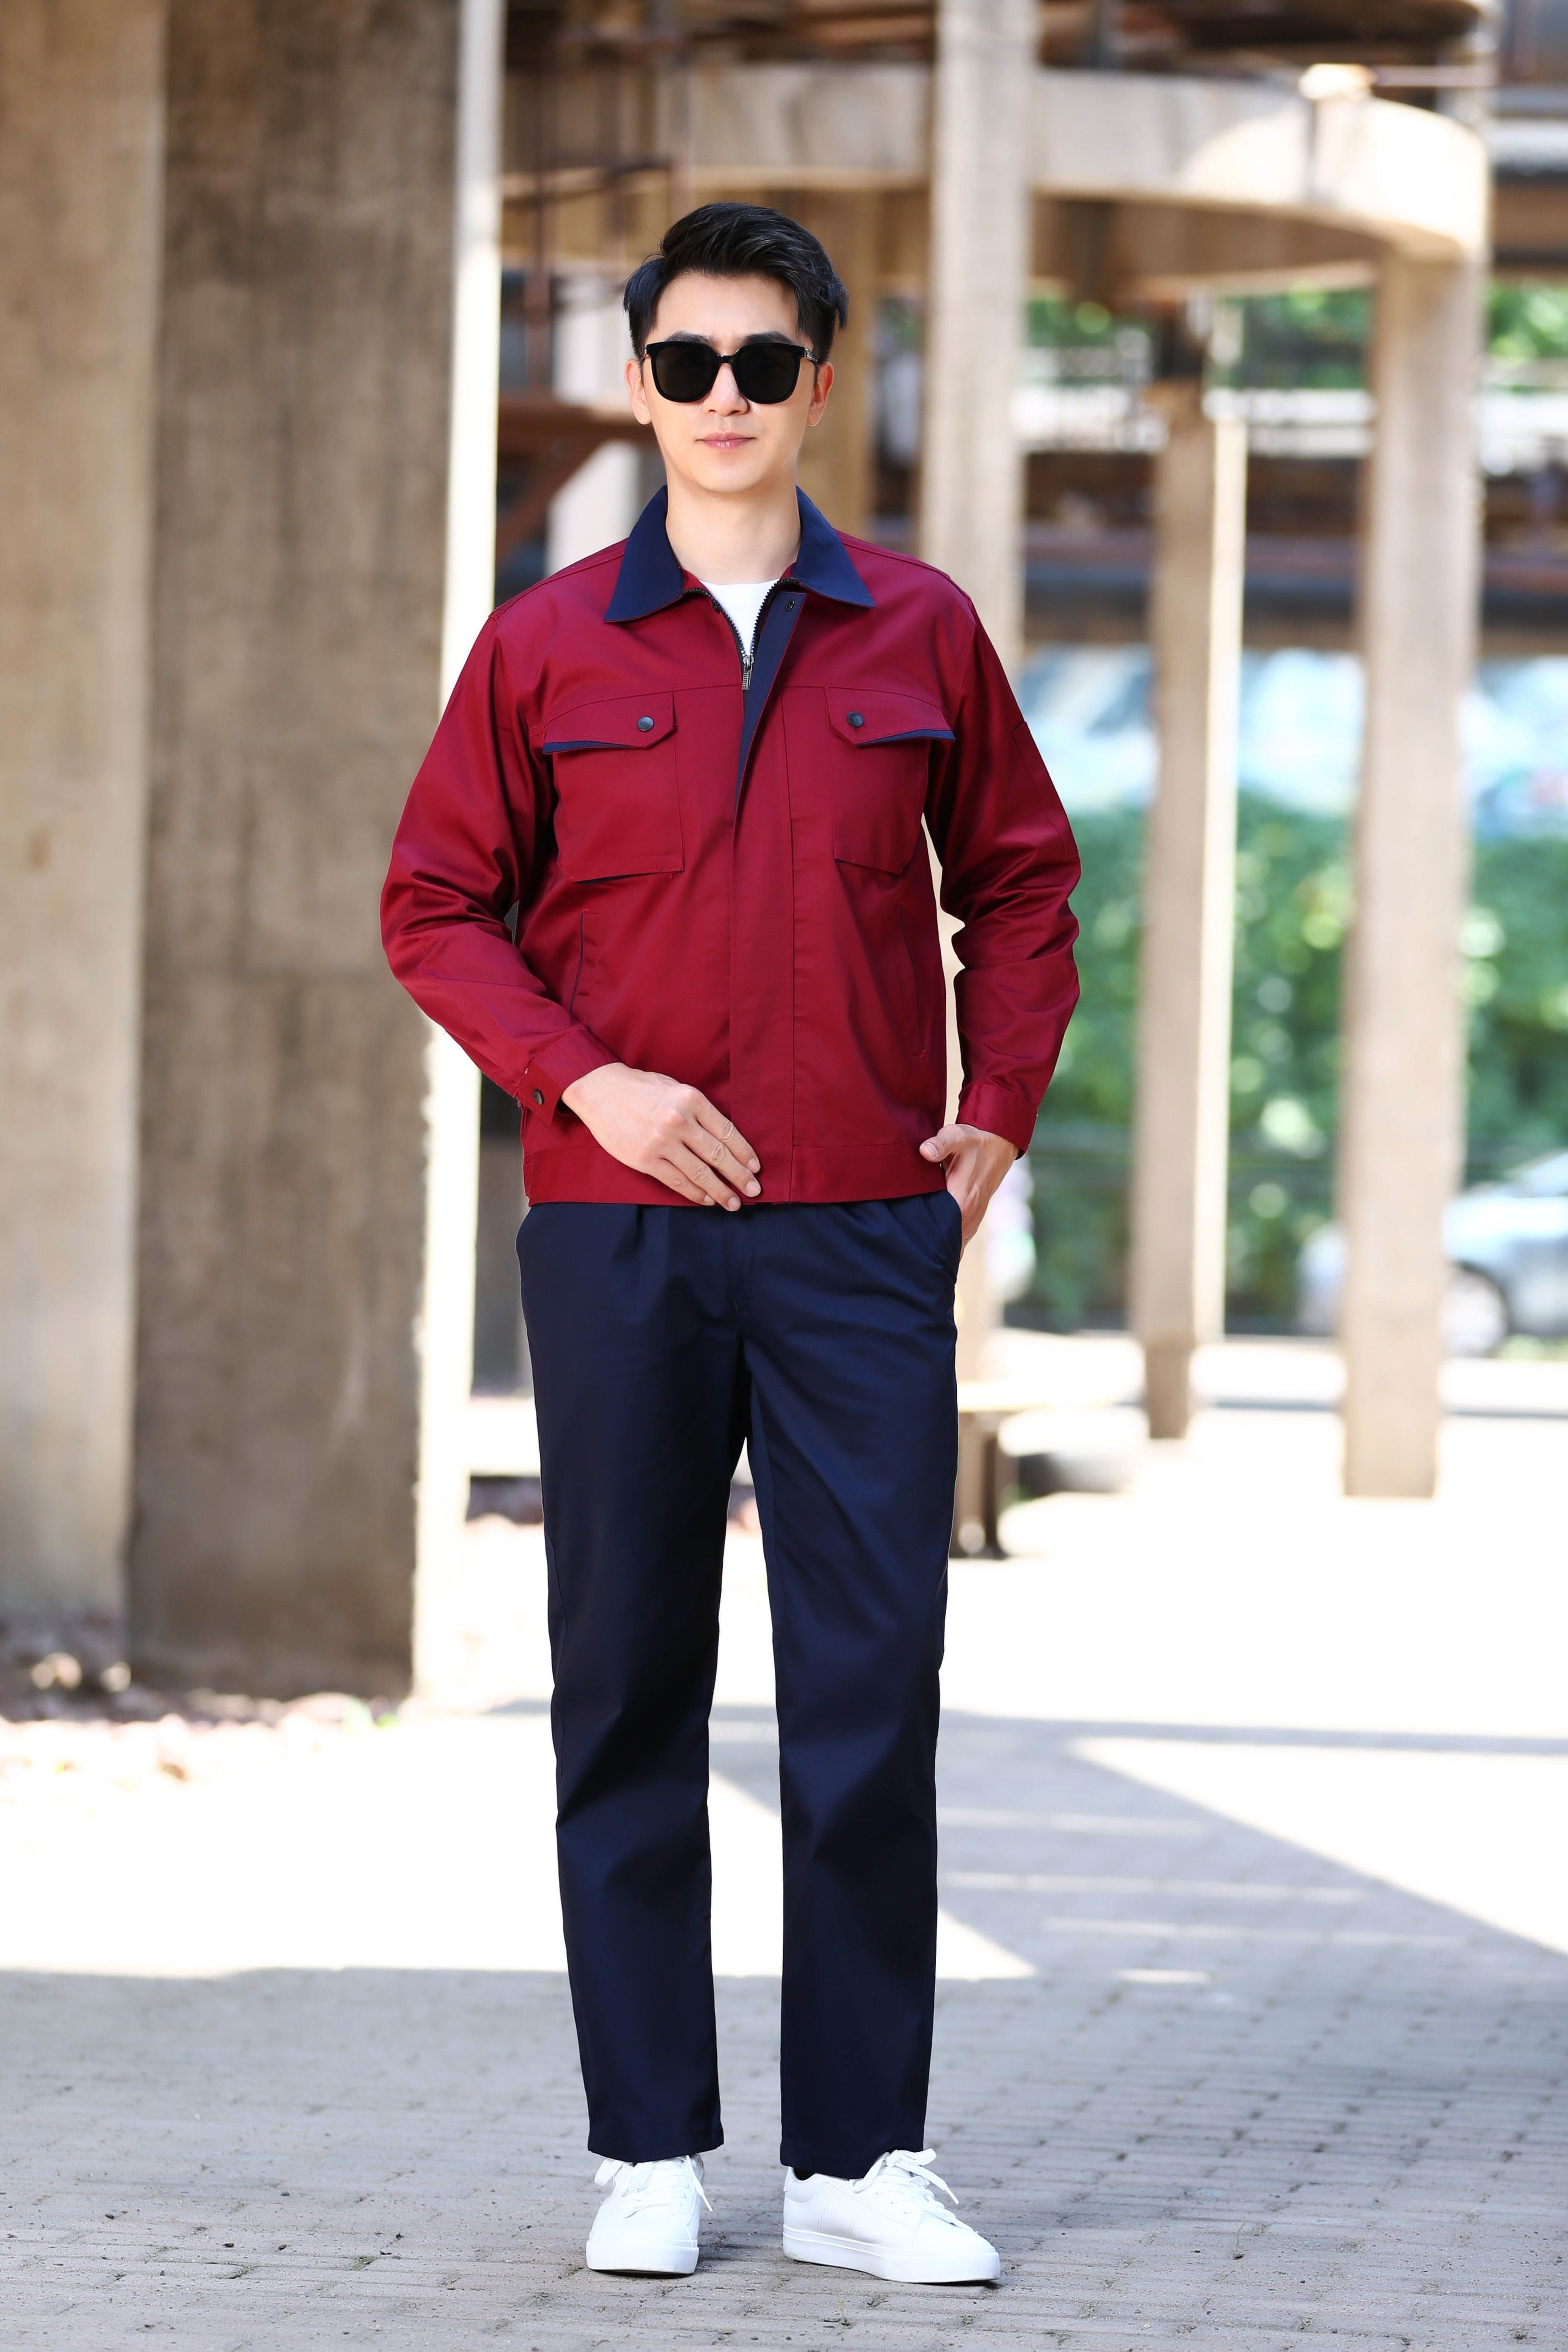 Corals Trading Co. 可樂思百貨商行 涤棉 Spring and Autumn Long Sleeve Polyester-Cotton Workwear SD-W808